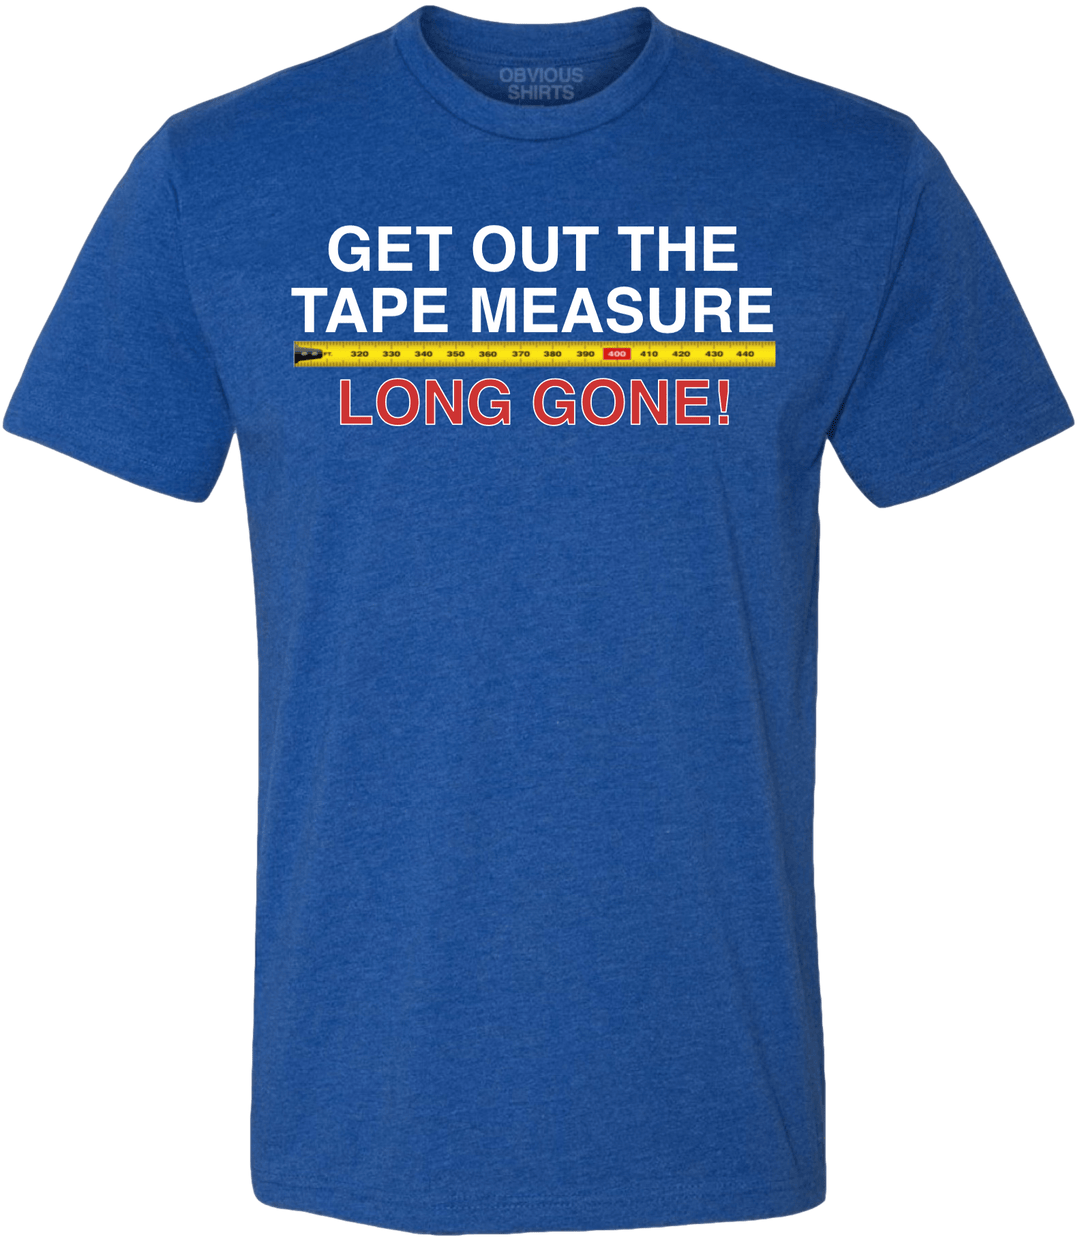 GET OUT THE TAPE MEASURE, LONG GONE! - OBVIOUS SHIRTS